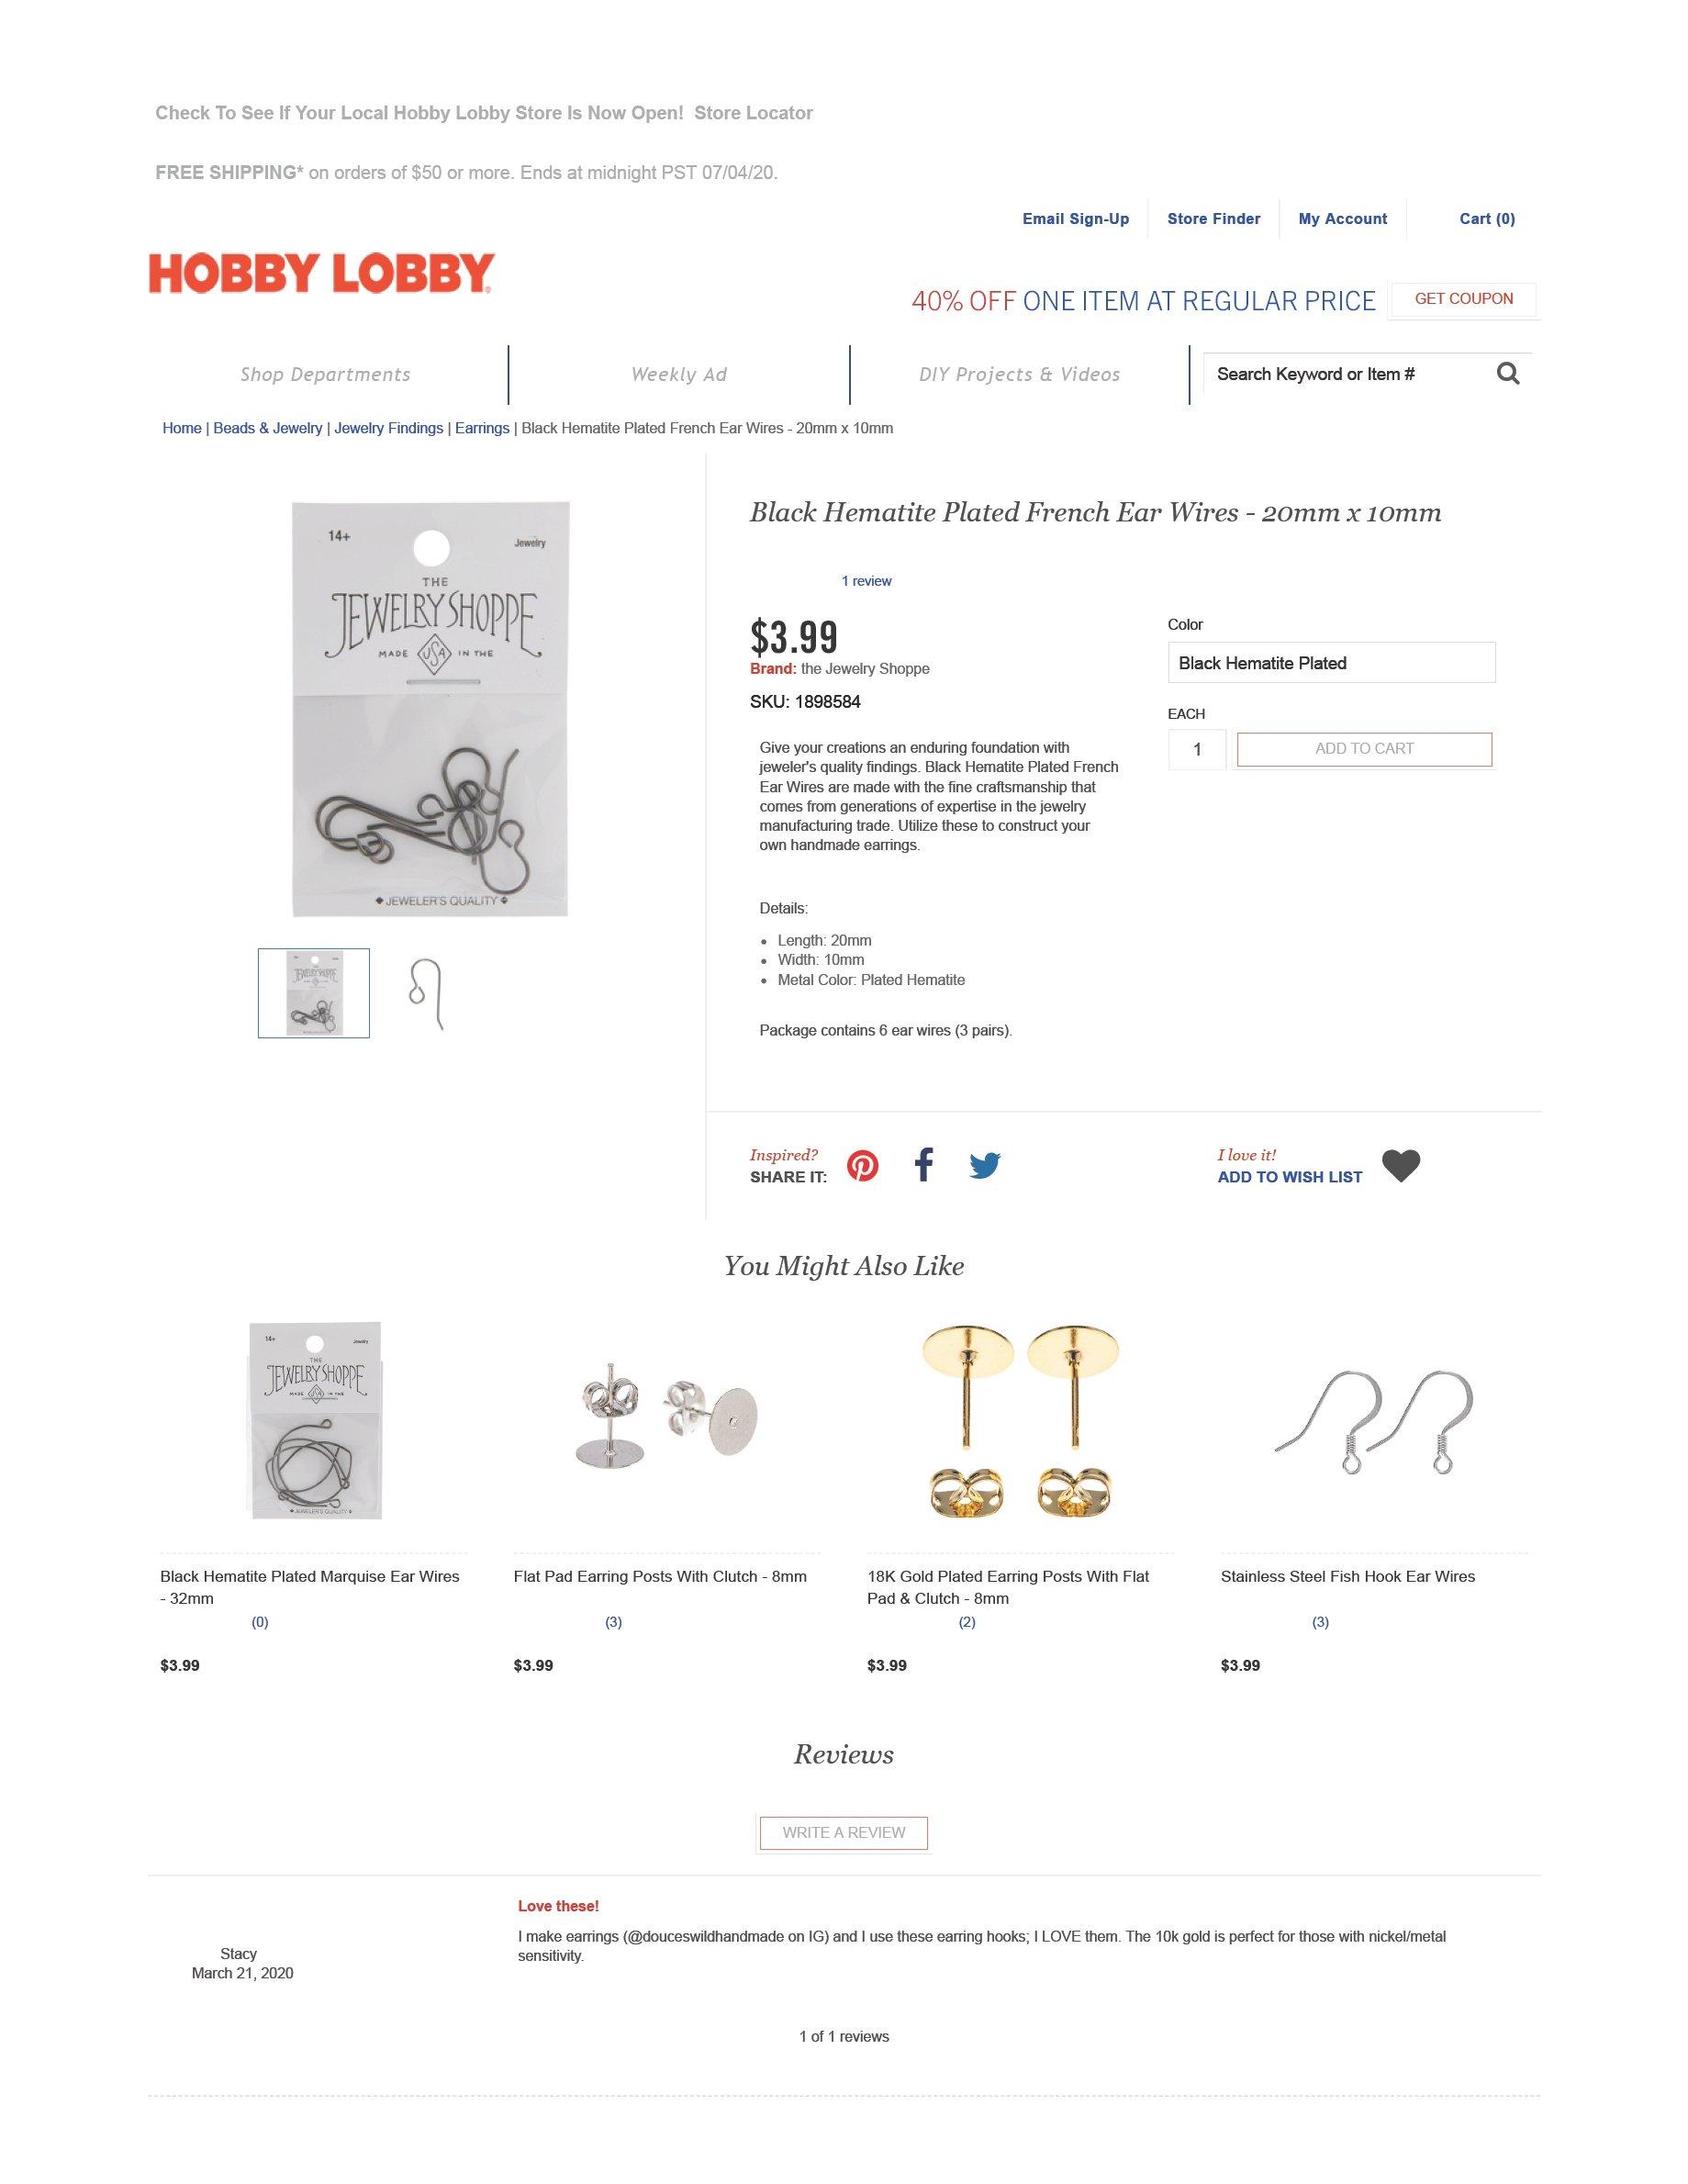 Flat Pad Earring Posts With Clutch - 8mm, Hobby Lobby